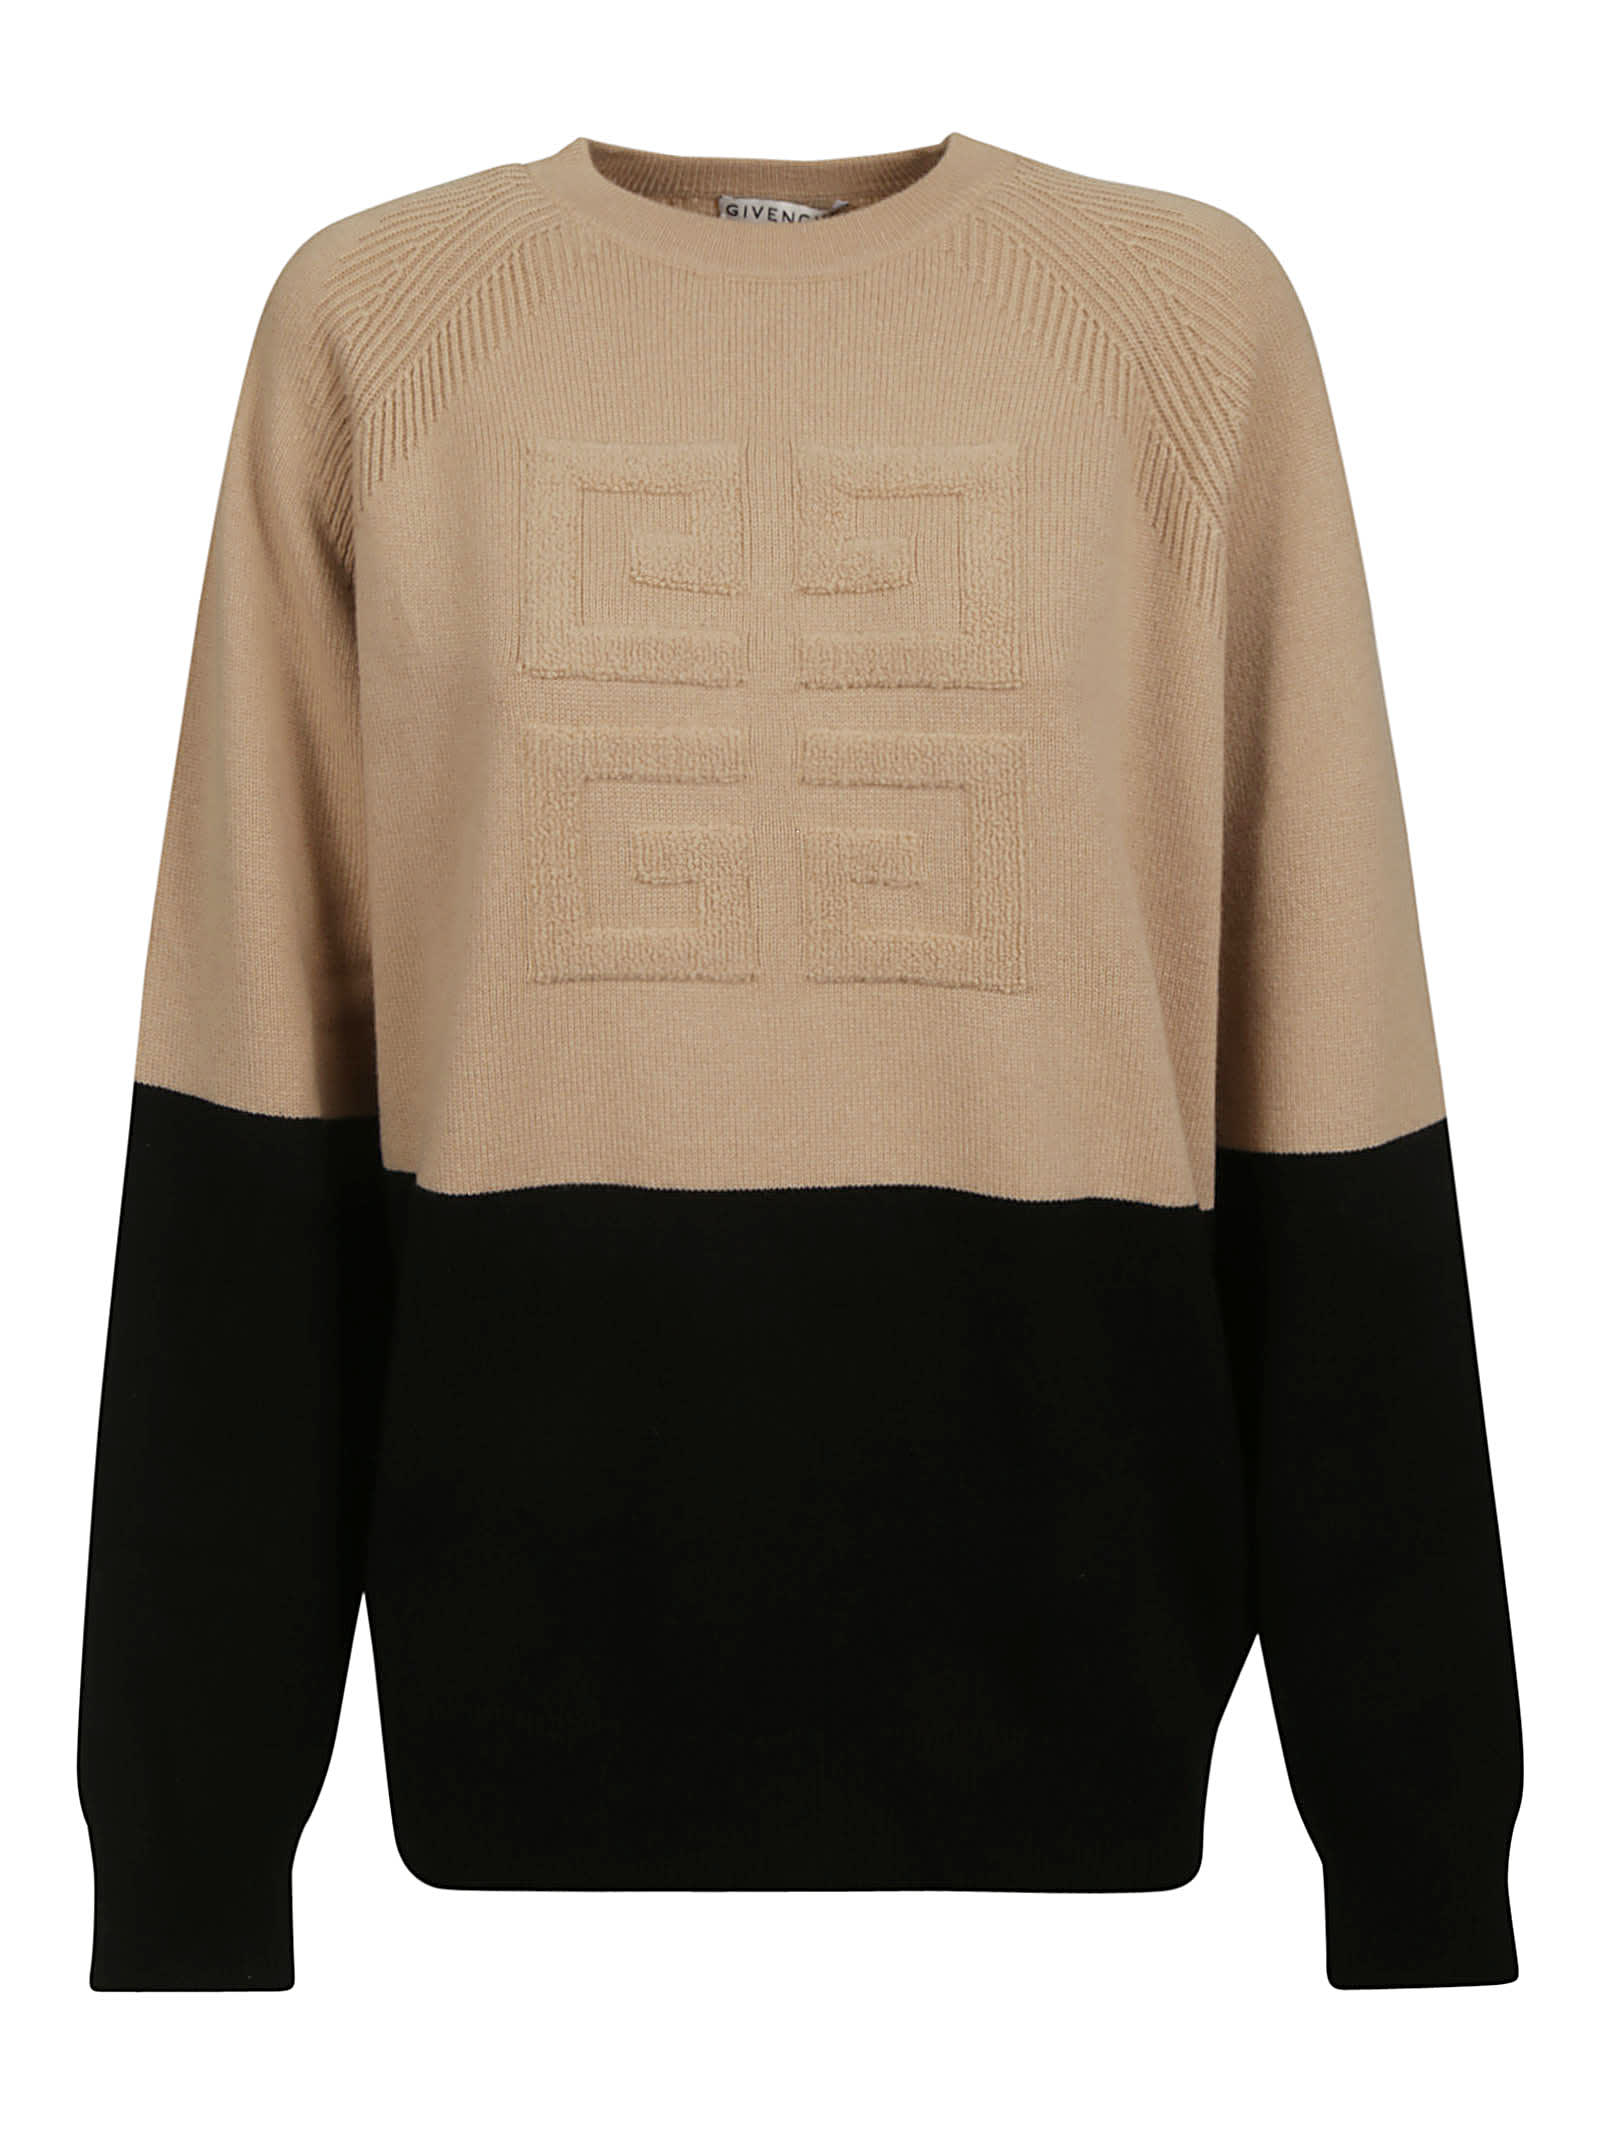 GIVENCHY EMBOSSED LOGO SWEATER,11228517